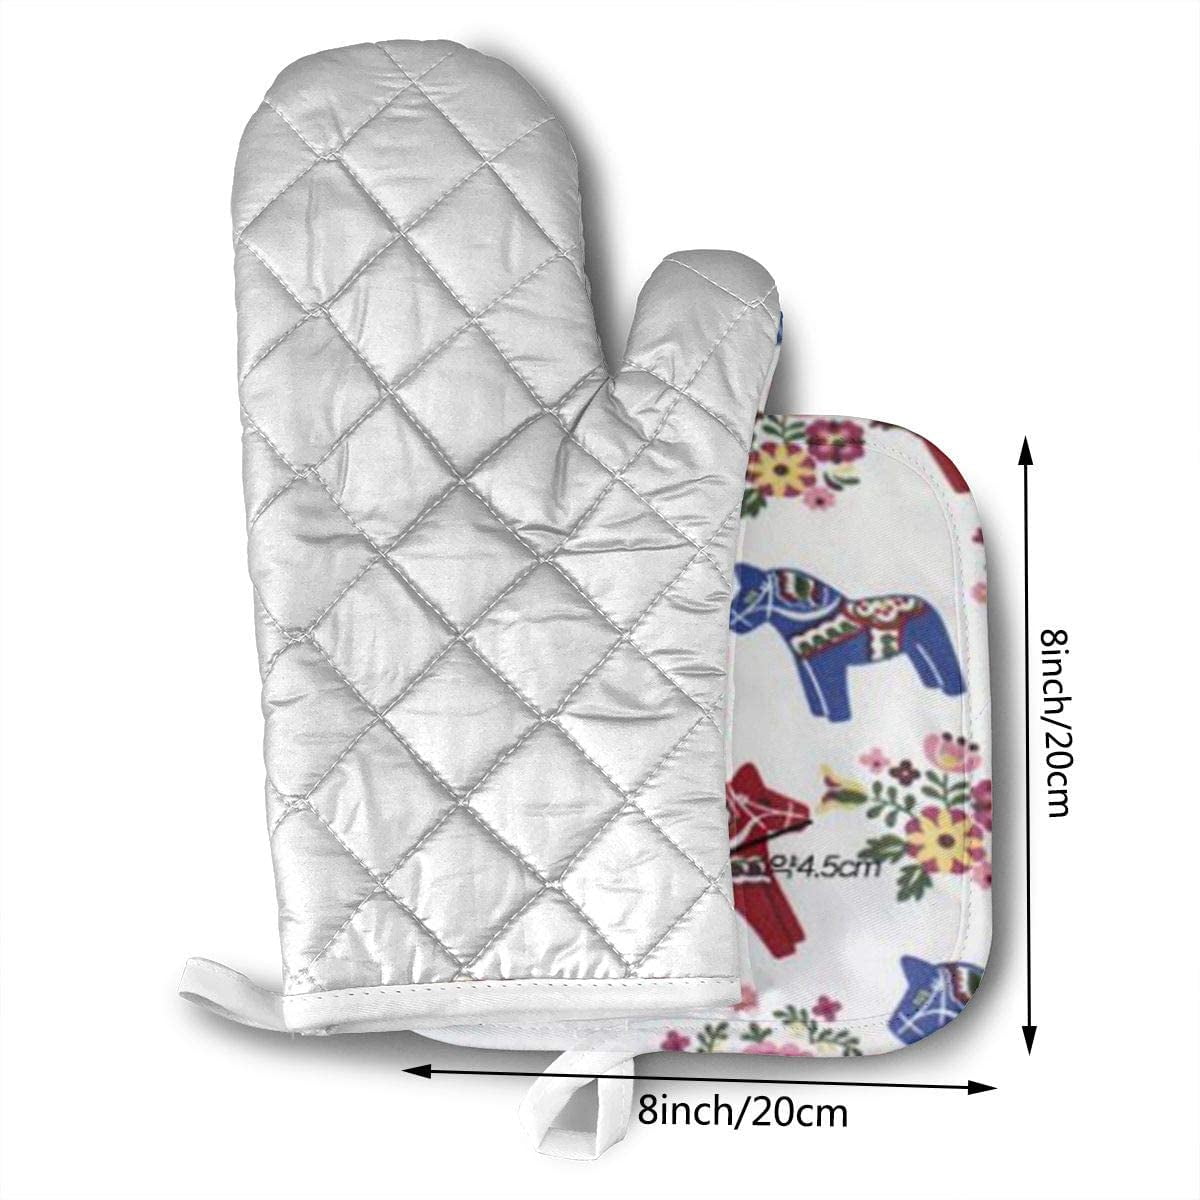 2-Piece Sets Floral Swedish Dala Horses Oven Mitts and Potholders Kitchen Set with Cotton Heat Resistant,Oven Gloves for BBQ Cooking Baking Grilling